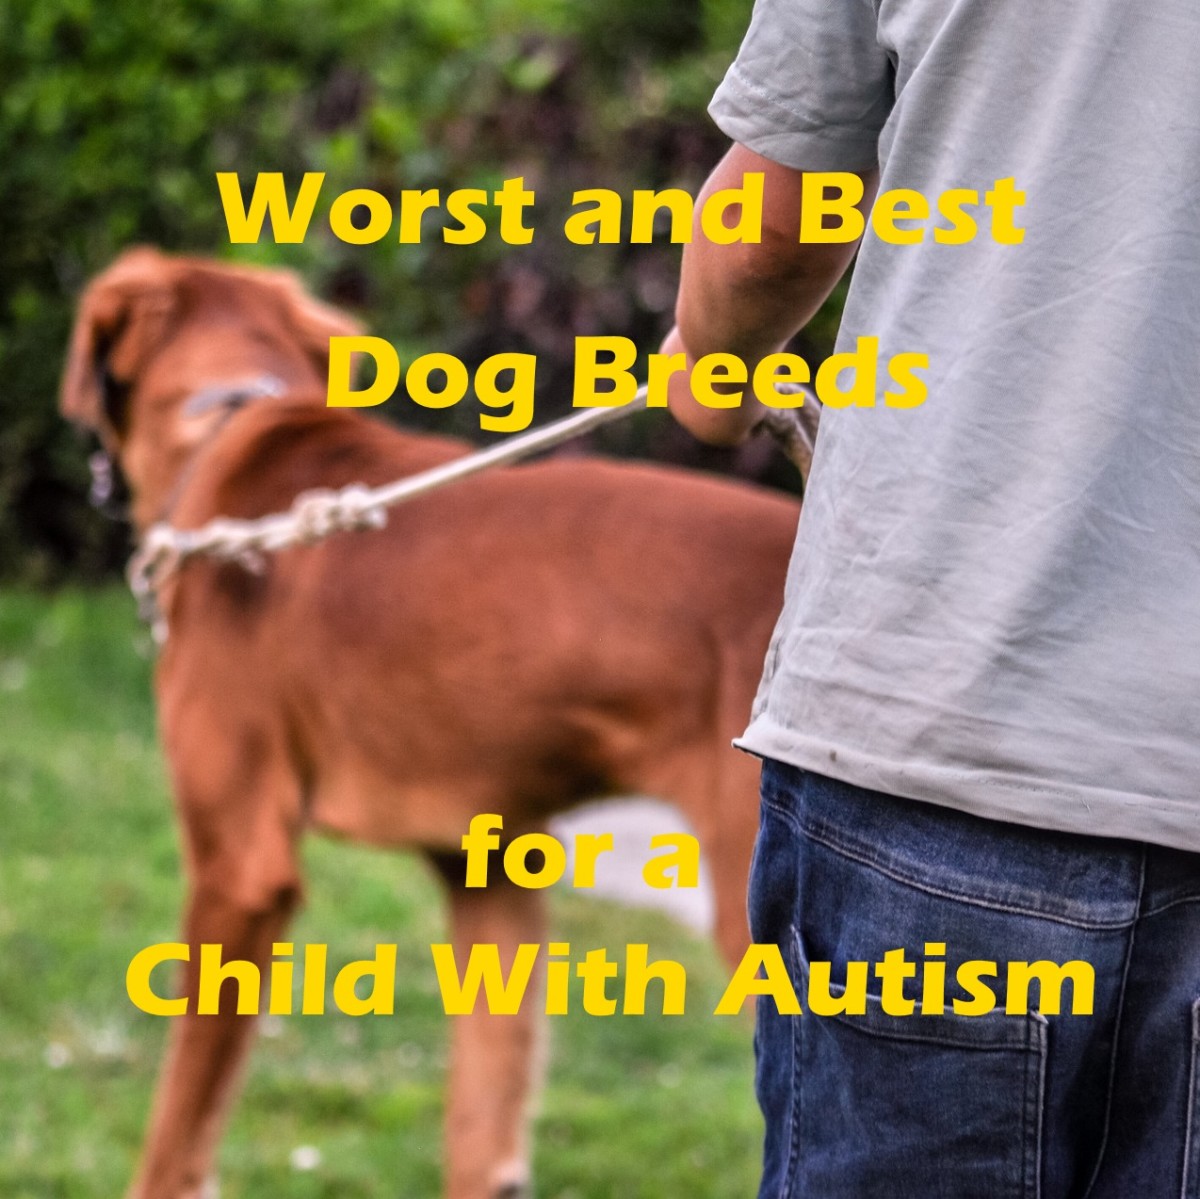 15 Worst Dog Breeds for a Child on the 